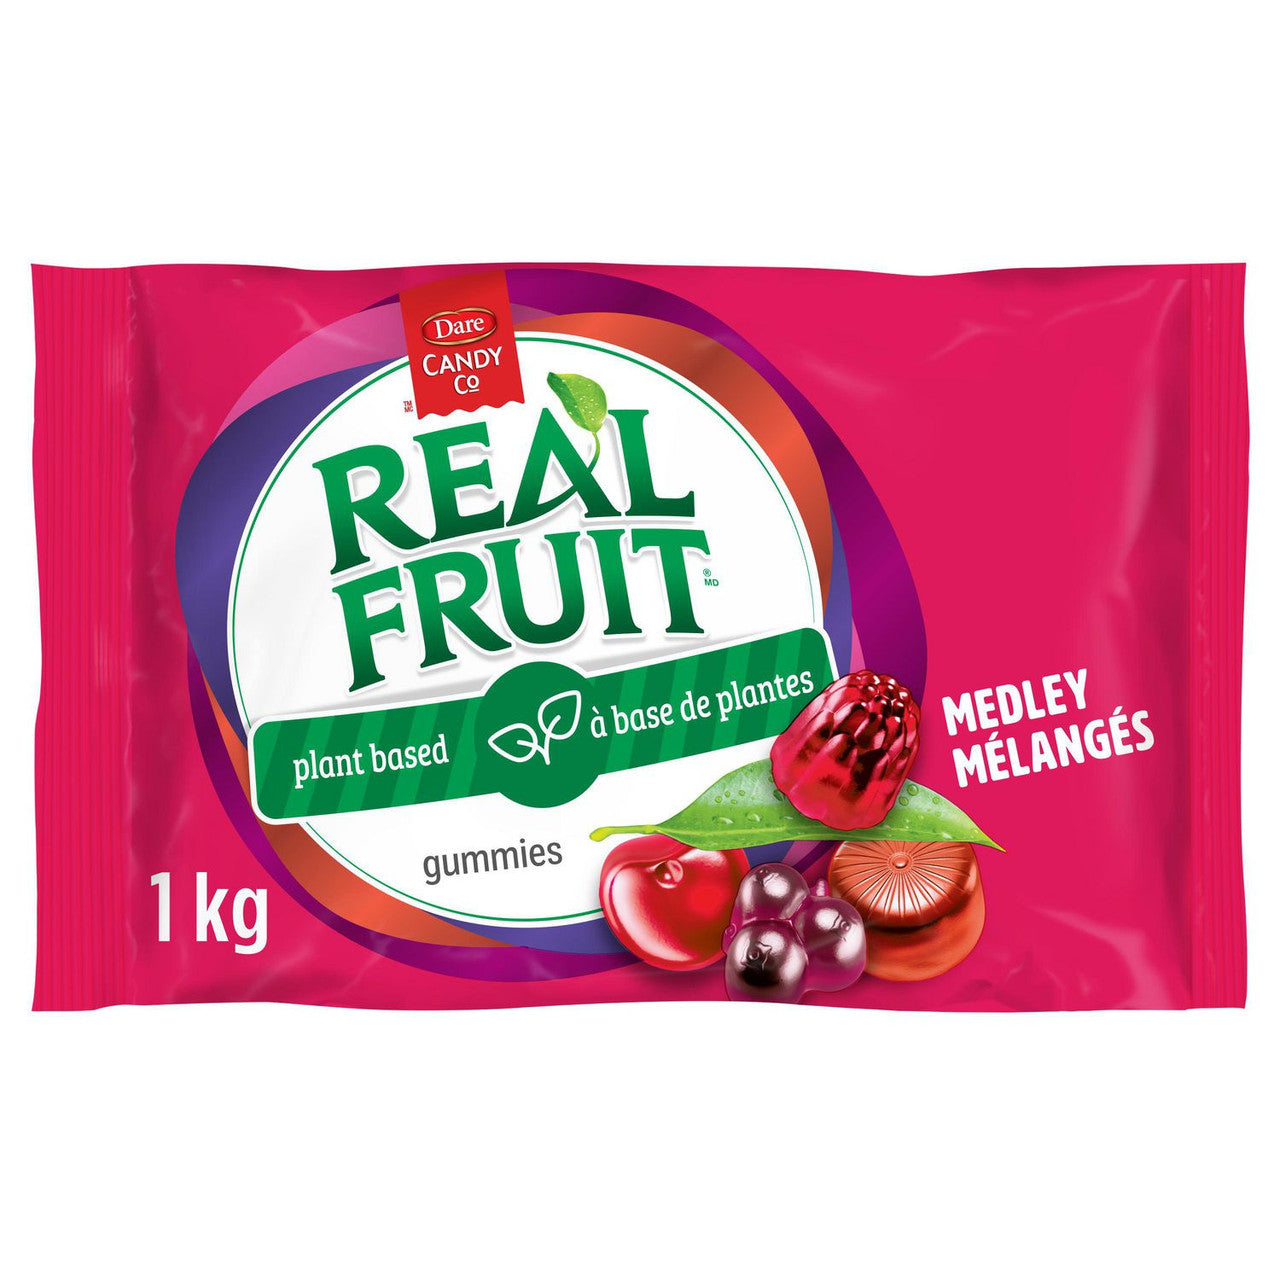 Dare RealFruit Gummies Medley 1kg/35oz bag (Imported from Canada)